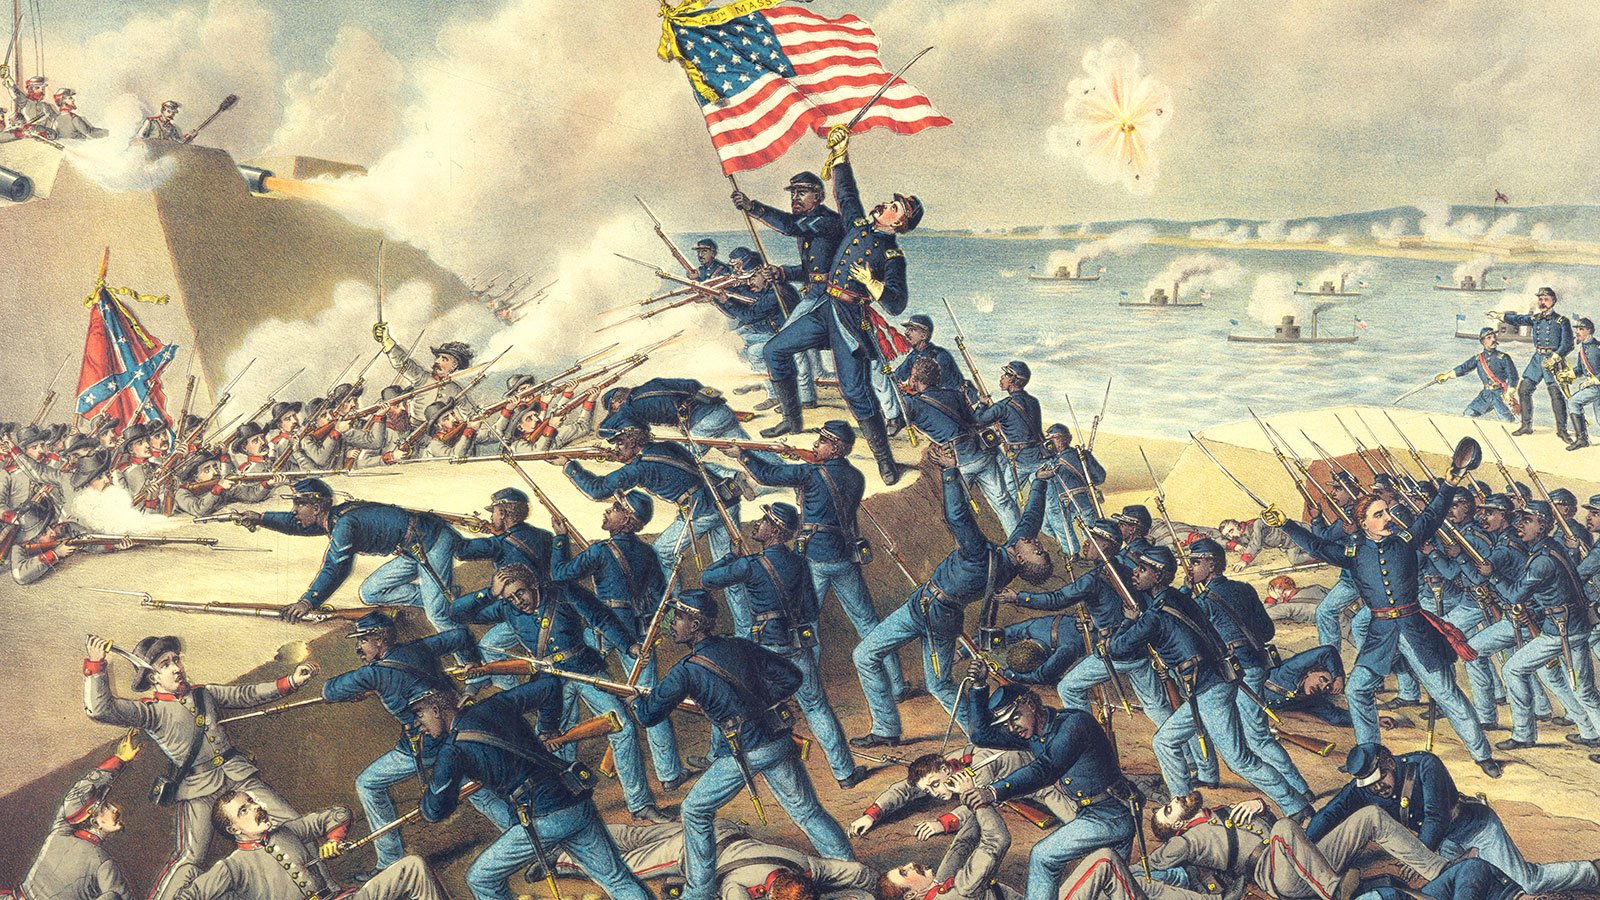 Chromolithograph of Union soldiers storming the walls of Fort Wagner